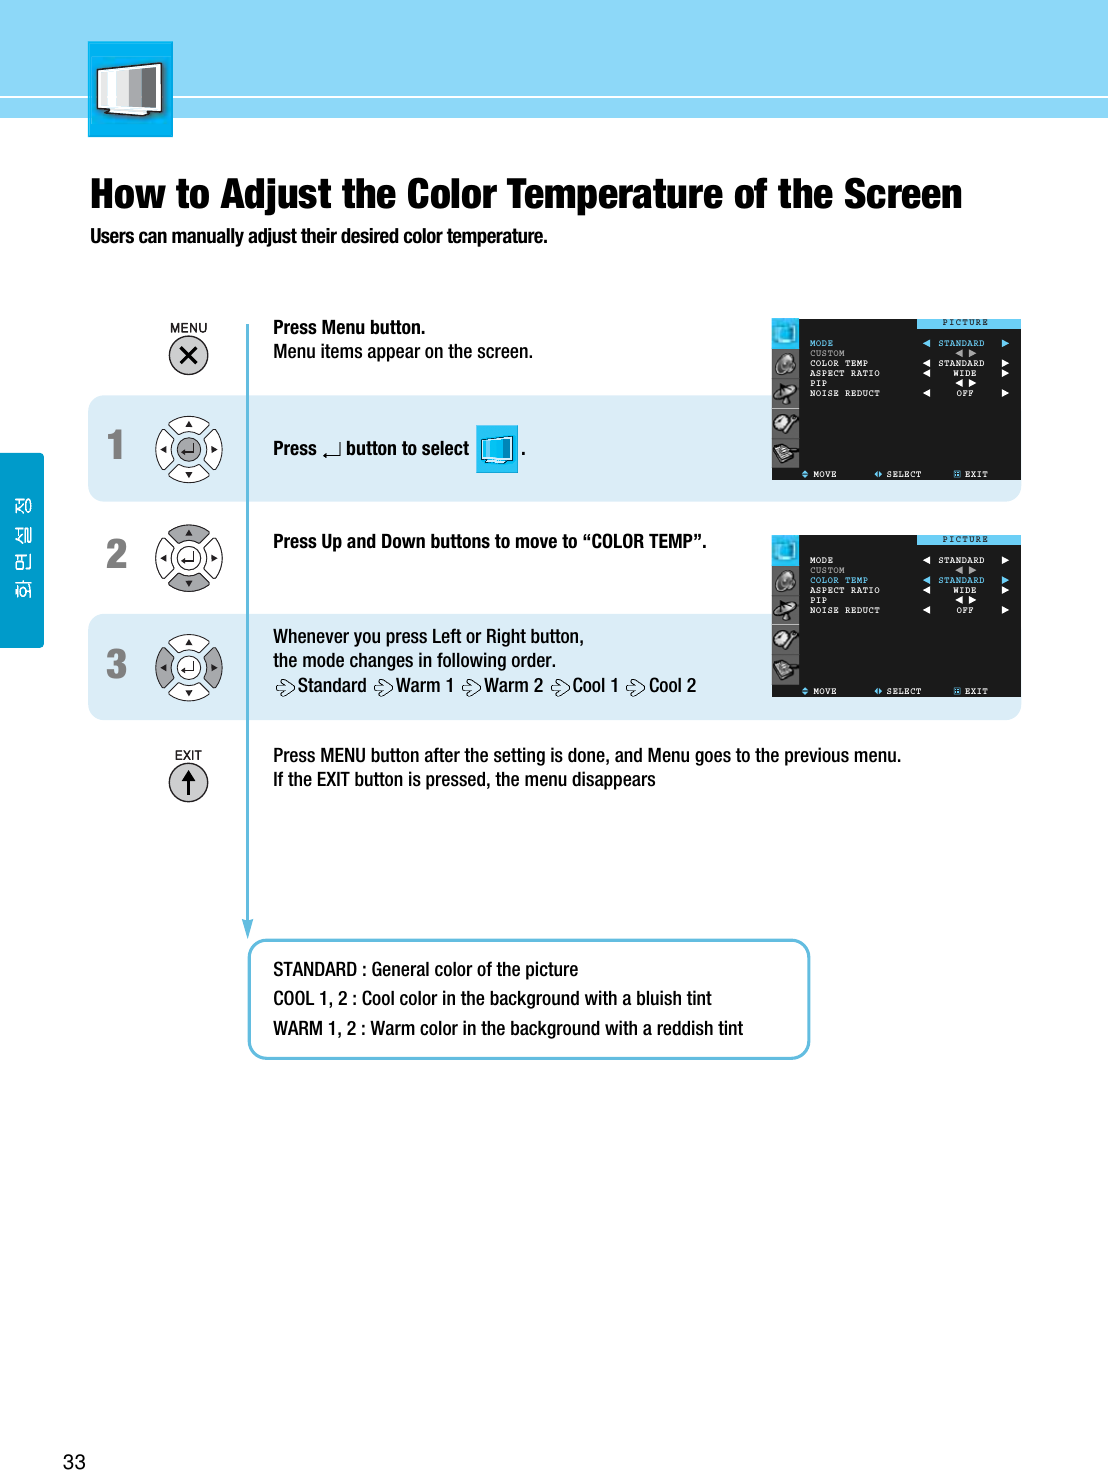 33How to Adjust the Color Temperature of the ScreenUsers can manually adjust their desired color temperature.Press Menu button.Menu items appear on the screen.Press button to select           .Press Up and Down buttons to move to “COLOR TEMP”.Whenever you press Left or Right button, the mode changes in following order.Standard Warm 1  Warm 2  Cool 1  Cool 2 Press MENU button after the setting is done, and Menu goes to the previous menu.If the EXIT button is pressed, the menu disappearsSTANDARD : General color of the pictureCOOL 1, 2 : Cool color in the background with a bluish tintWARM 1, 2 : Warm color in the background with a reddish tint123MODECUSTOMCOLOR TEMPASPECT RATIOPIPNOISE REDUCTMOVE SELECT EXITSTANDARDSTANDARDWIDEOFFPICTUREMODECUSTOMCOLOR TEMPASPECT RATIOPIPNOISE REDUCTMOVE SELECT EXITSTANDARDSTANDARDWIDEOFFPICTURE